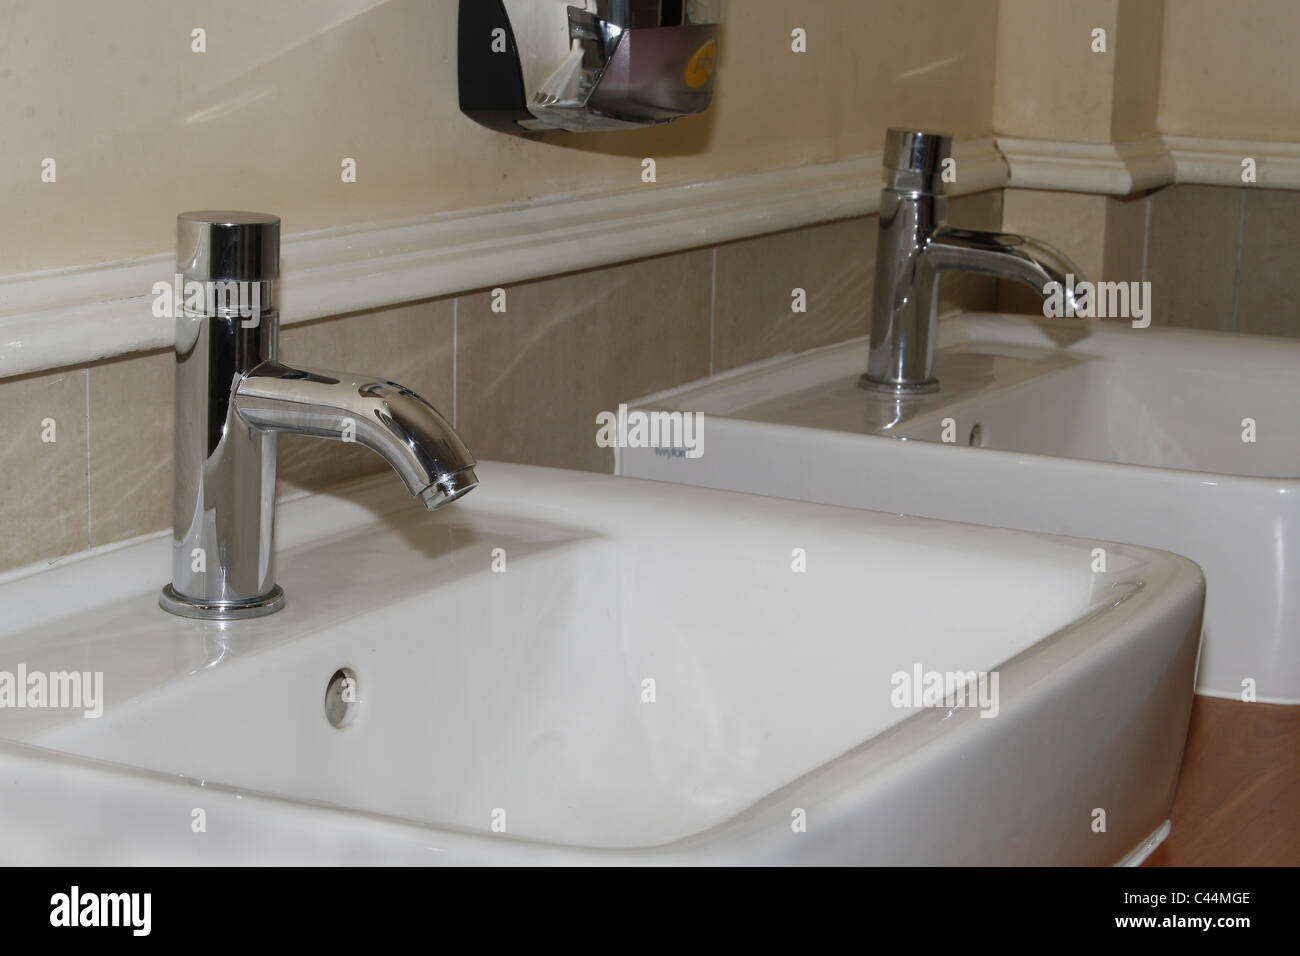 tap and sink in toilet of restaurant. Worksop, Notts, England Stock Photo